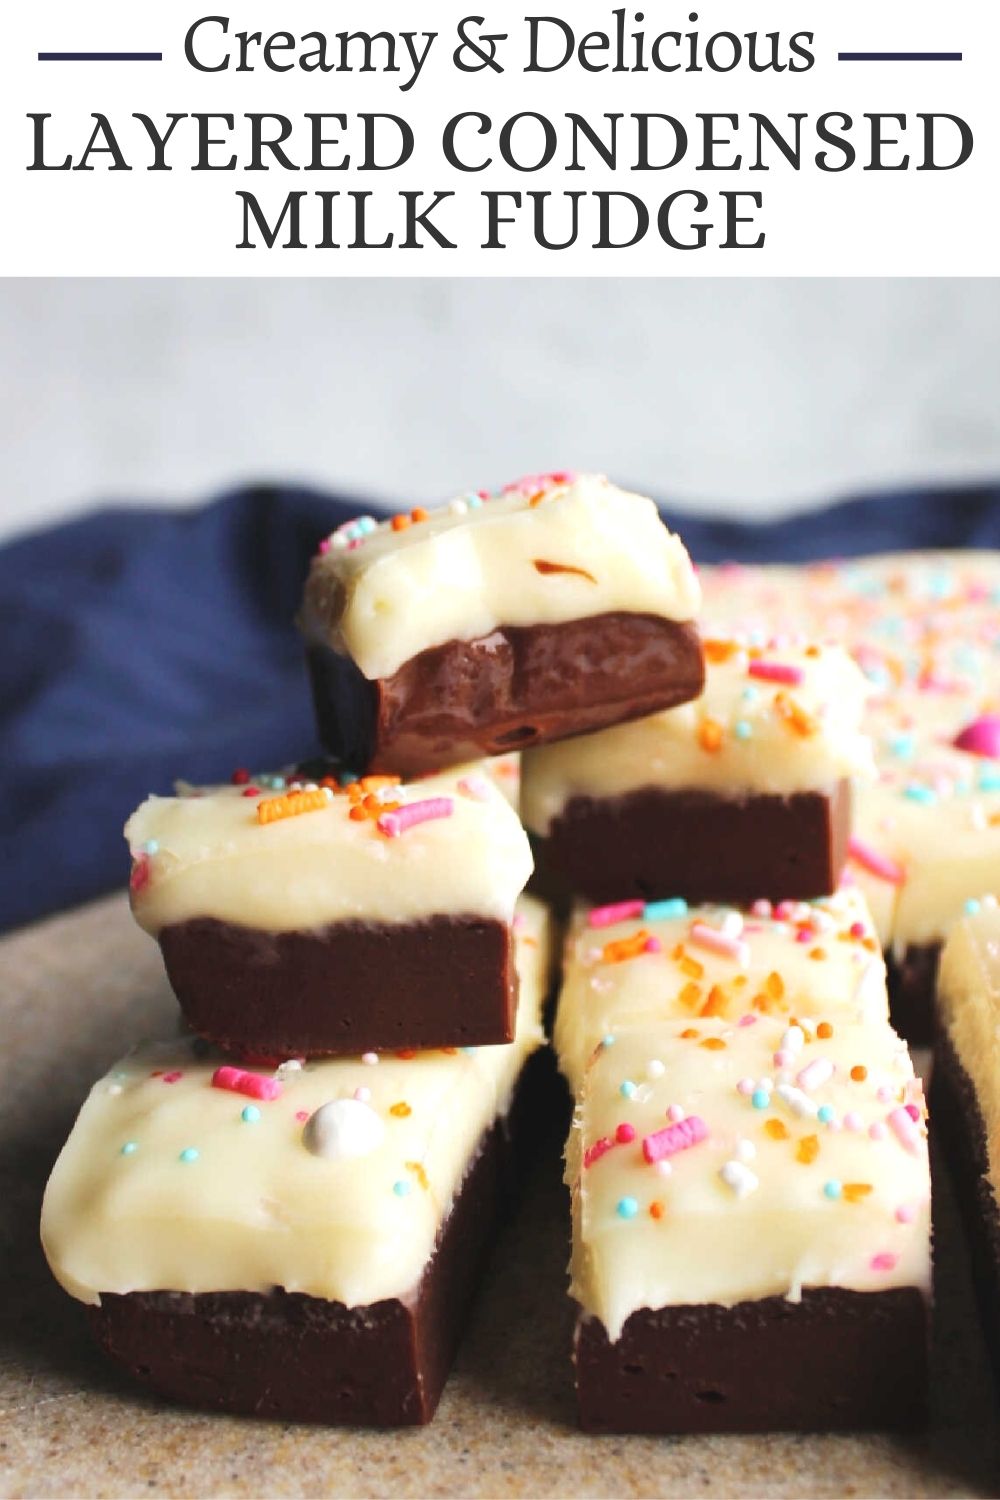 A layer of white fudge on top of chocolaty fudge is the perfect sweet and creamy treat. Ours is dressed up with fun sprinkles for the 4th of July, bu it could easily be adapted for any occasion.